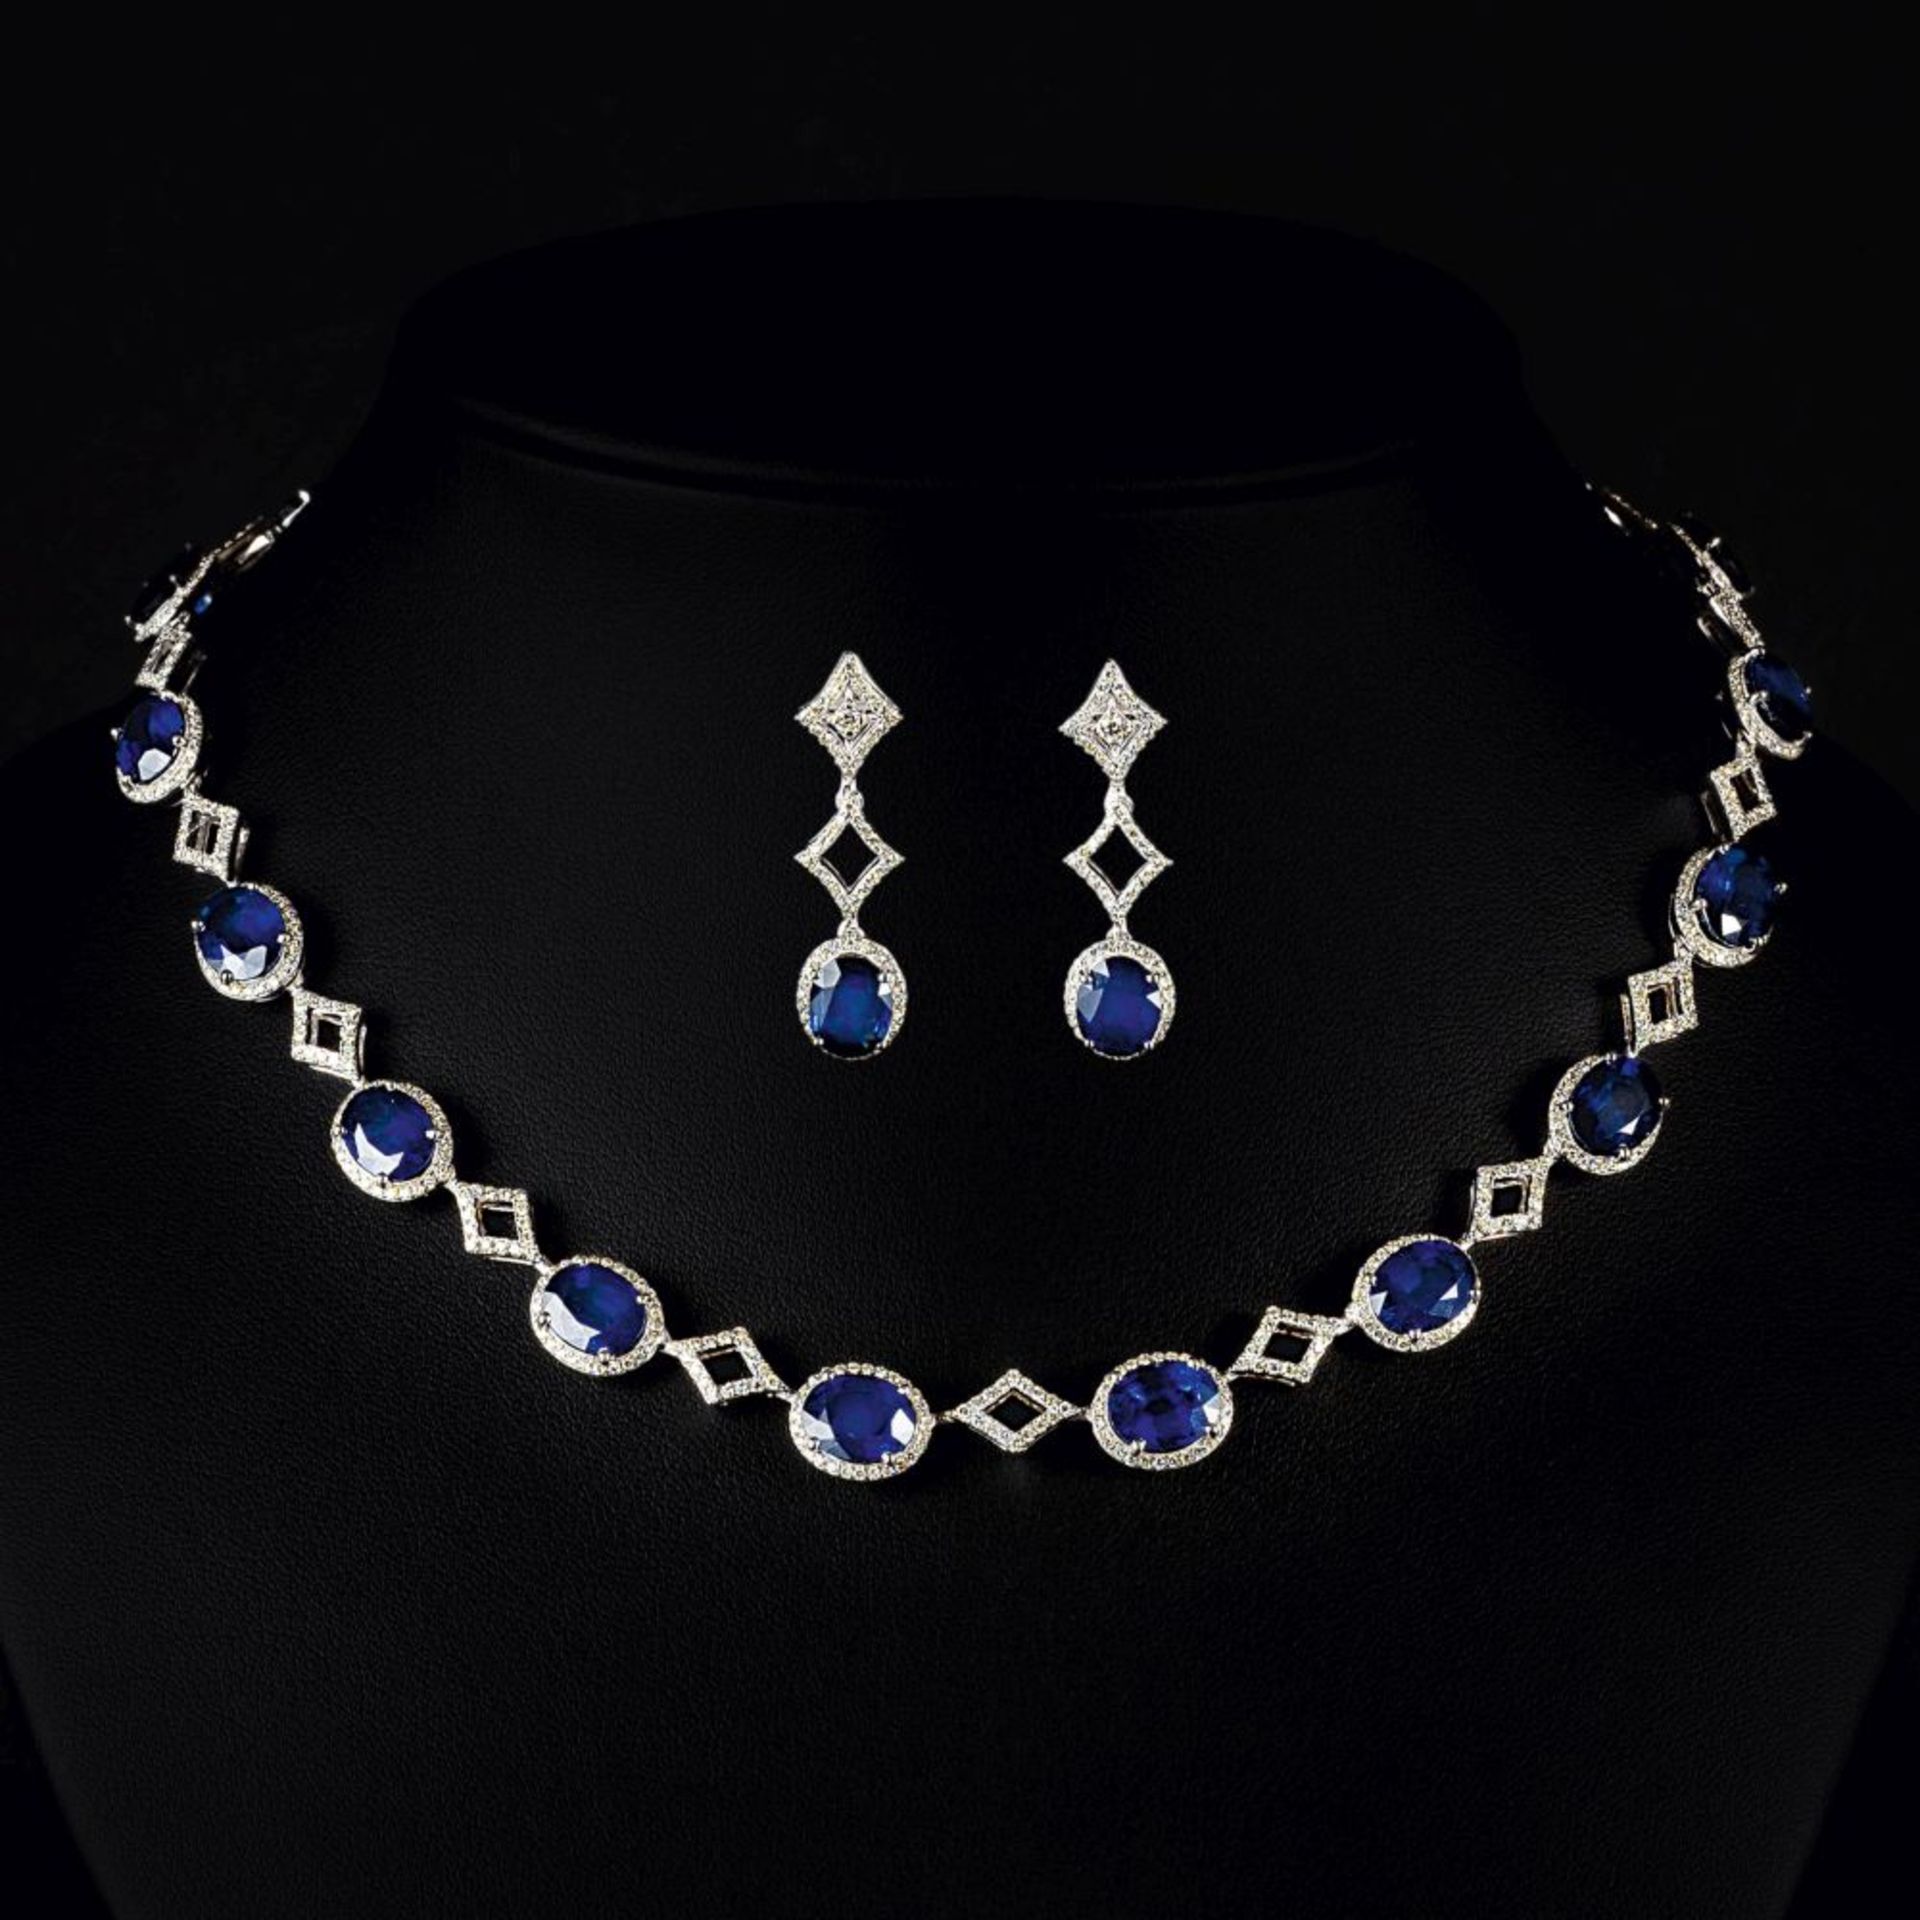 An exclusive Sapphire Diamond Necklace with matching Pair of Earrings.